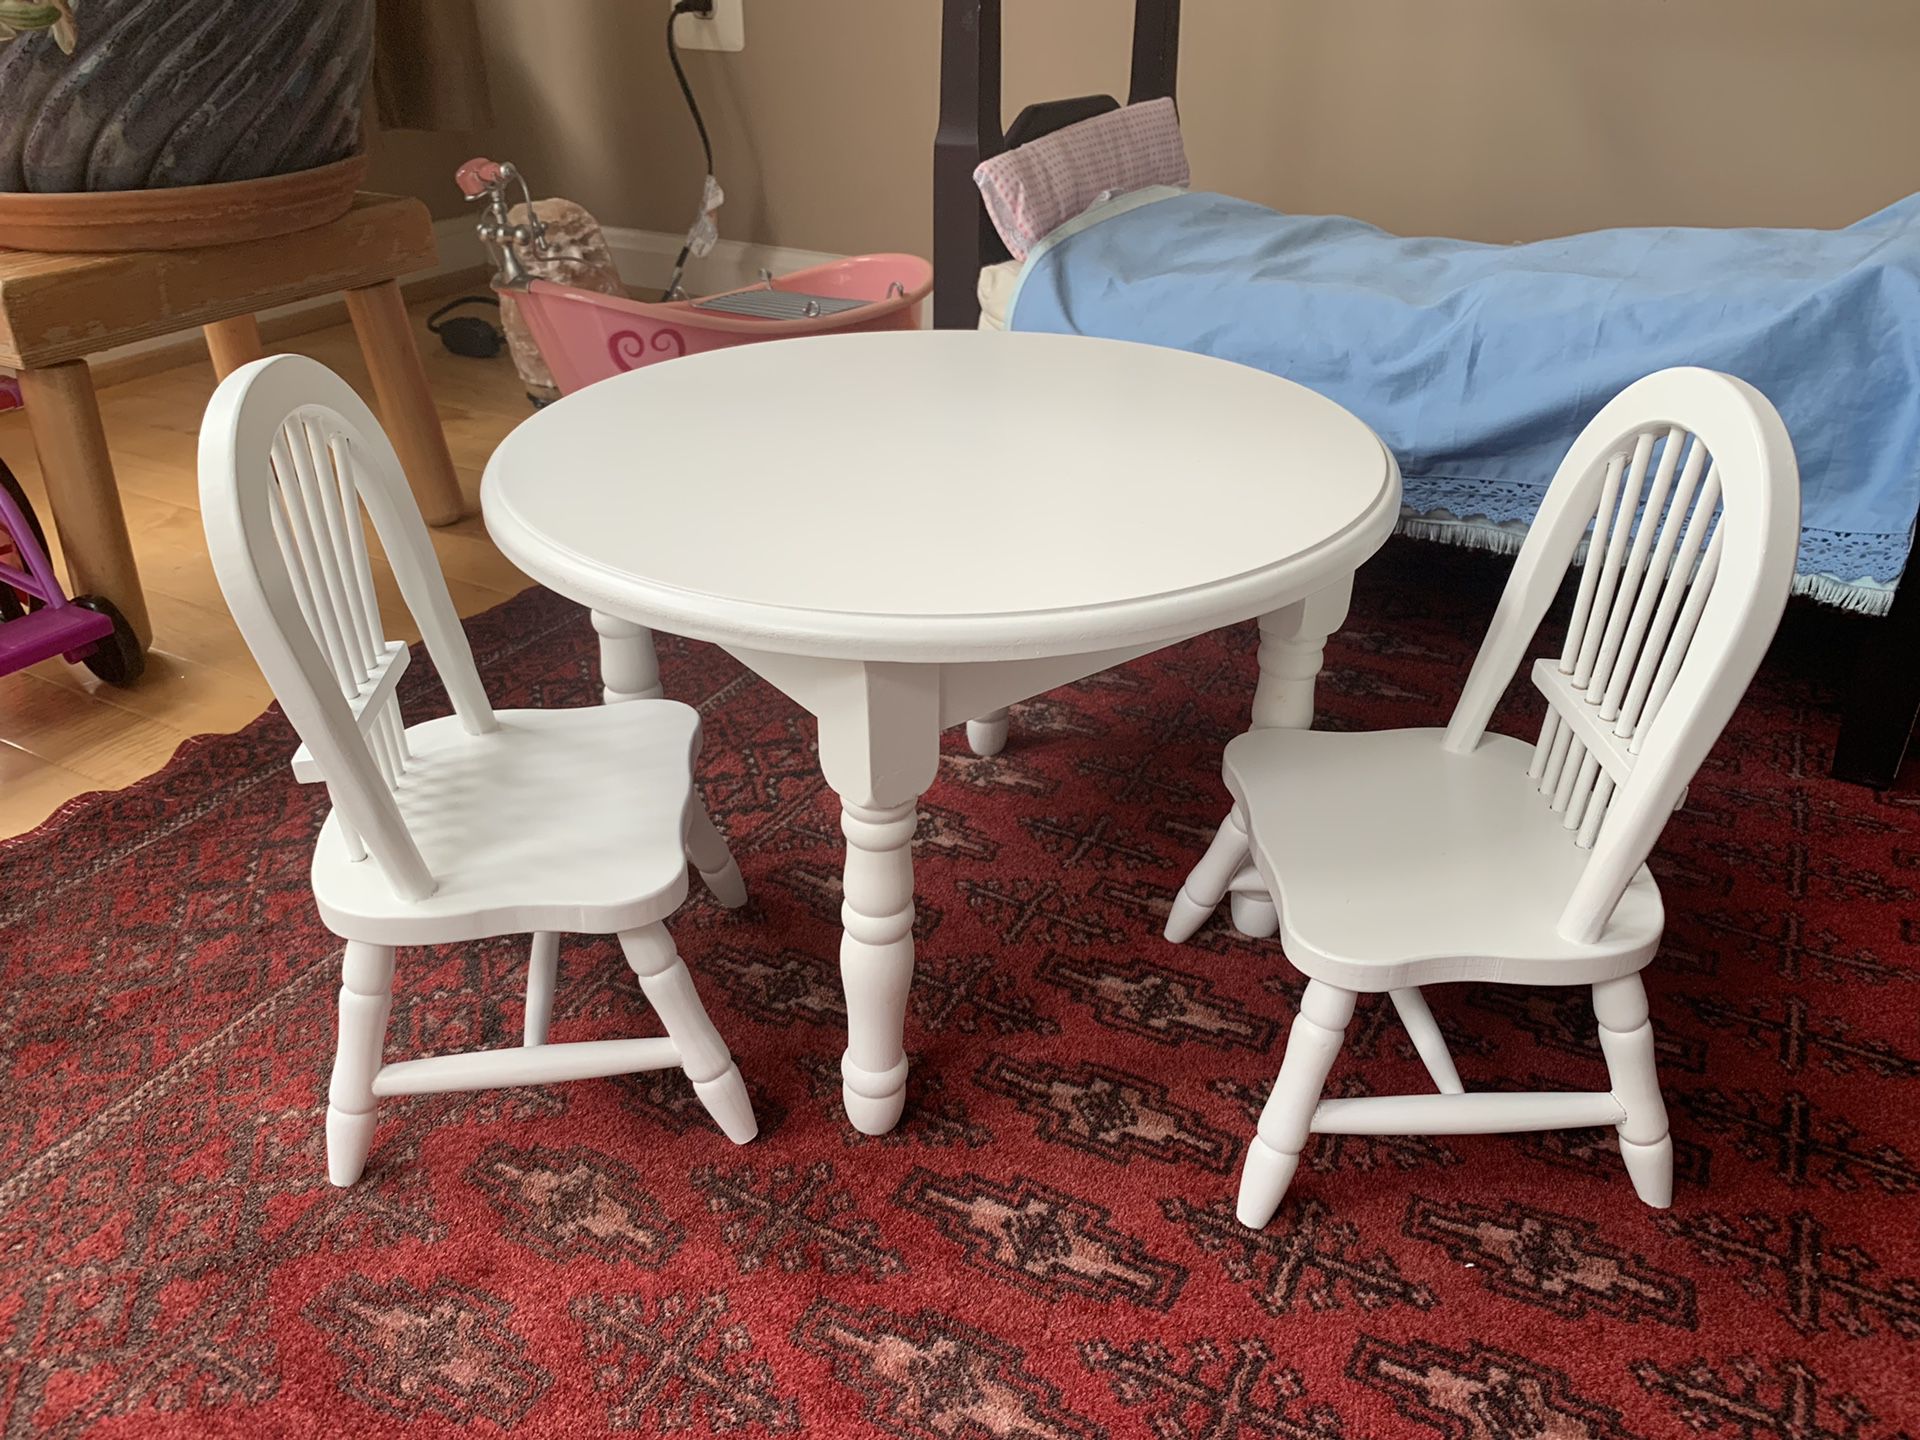 Vintage American Girl sized table & chairs